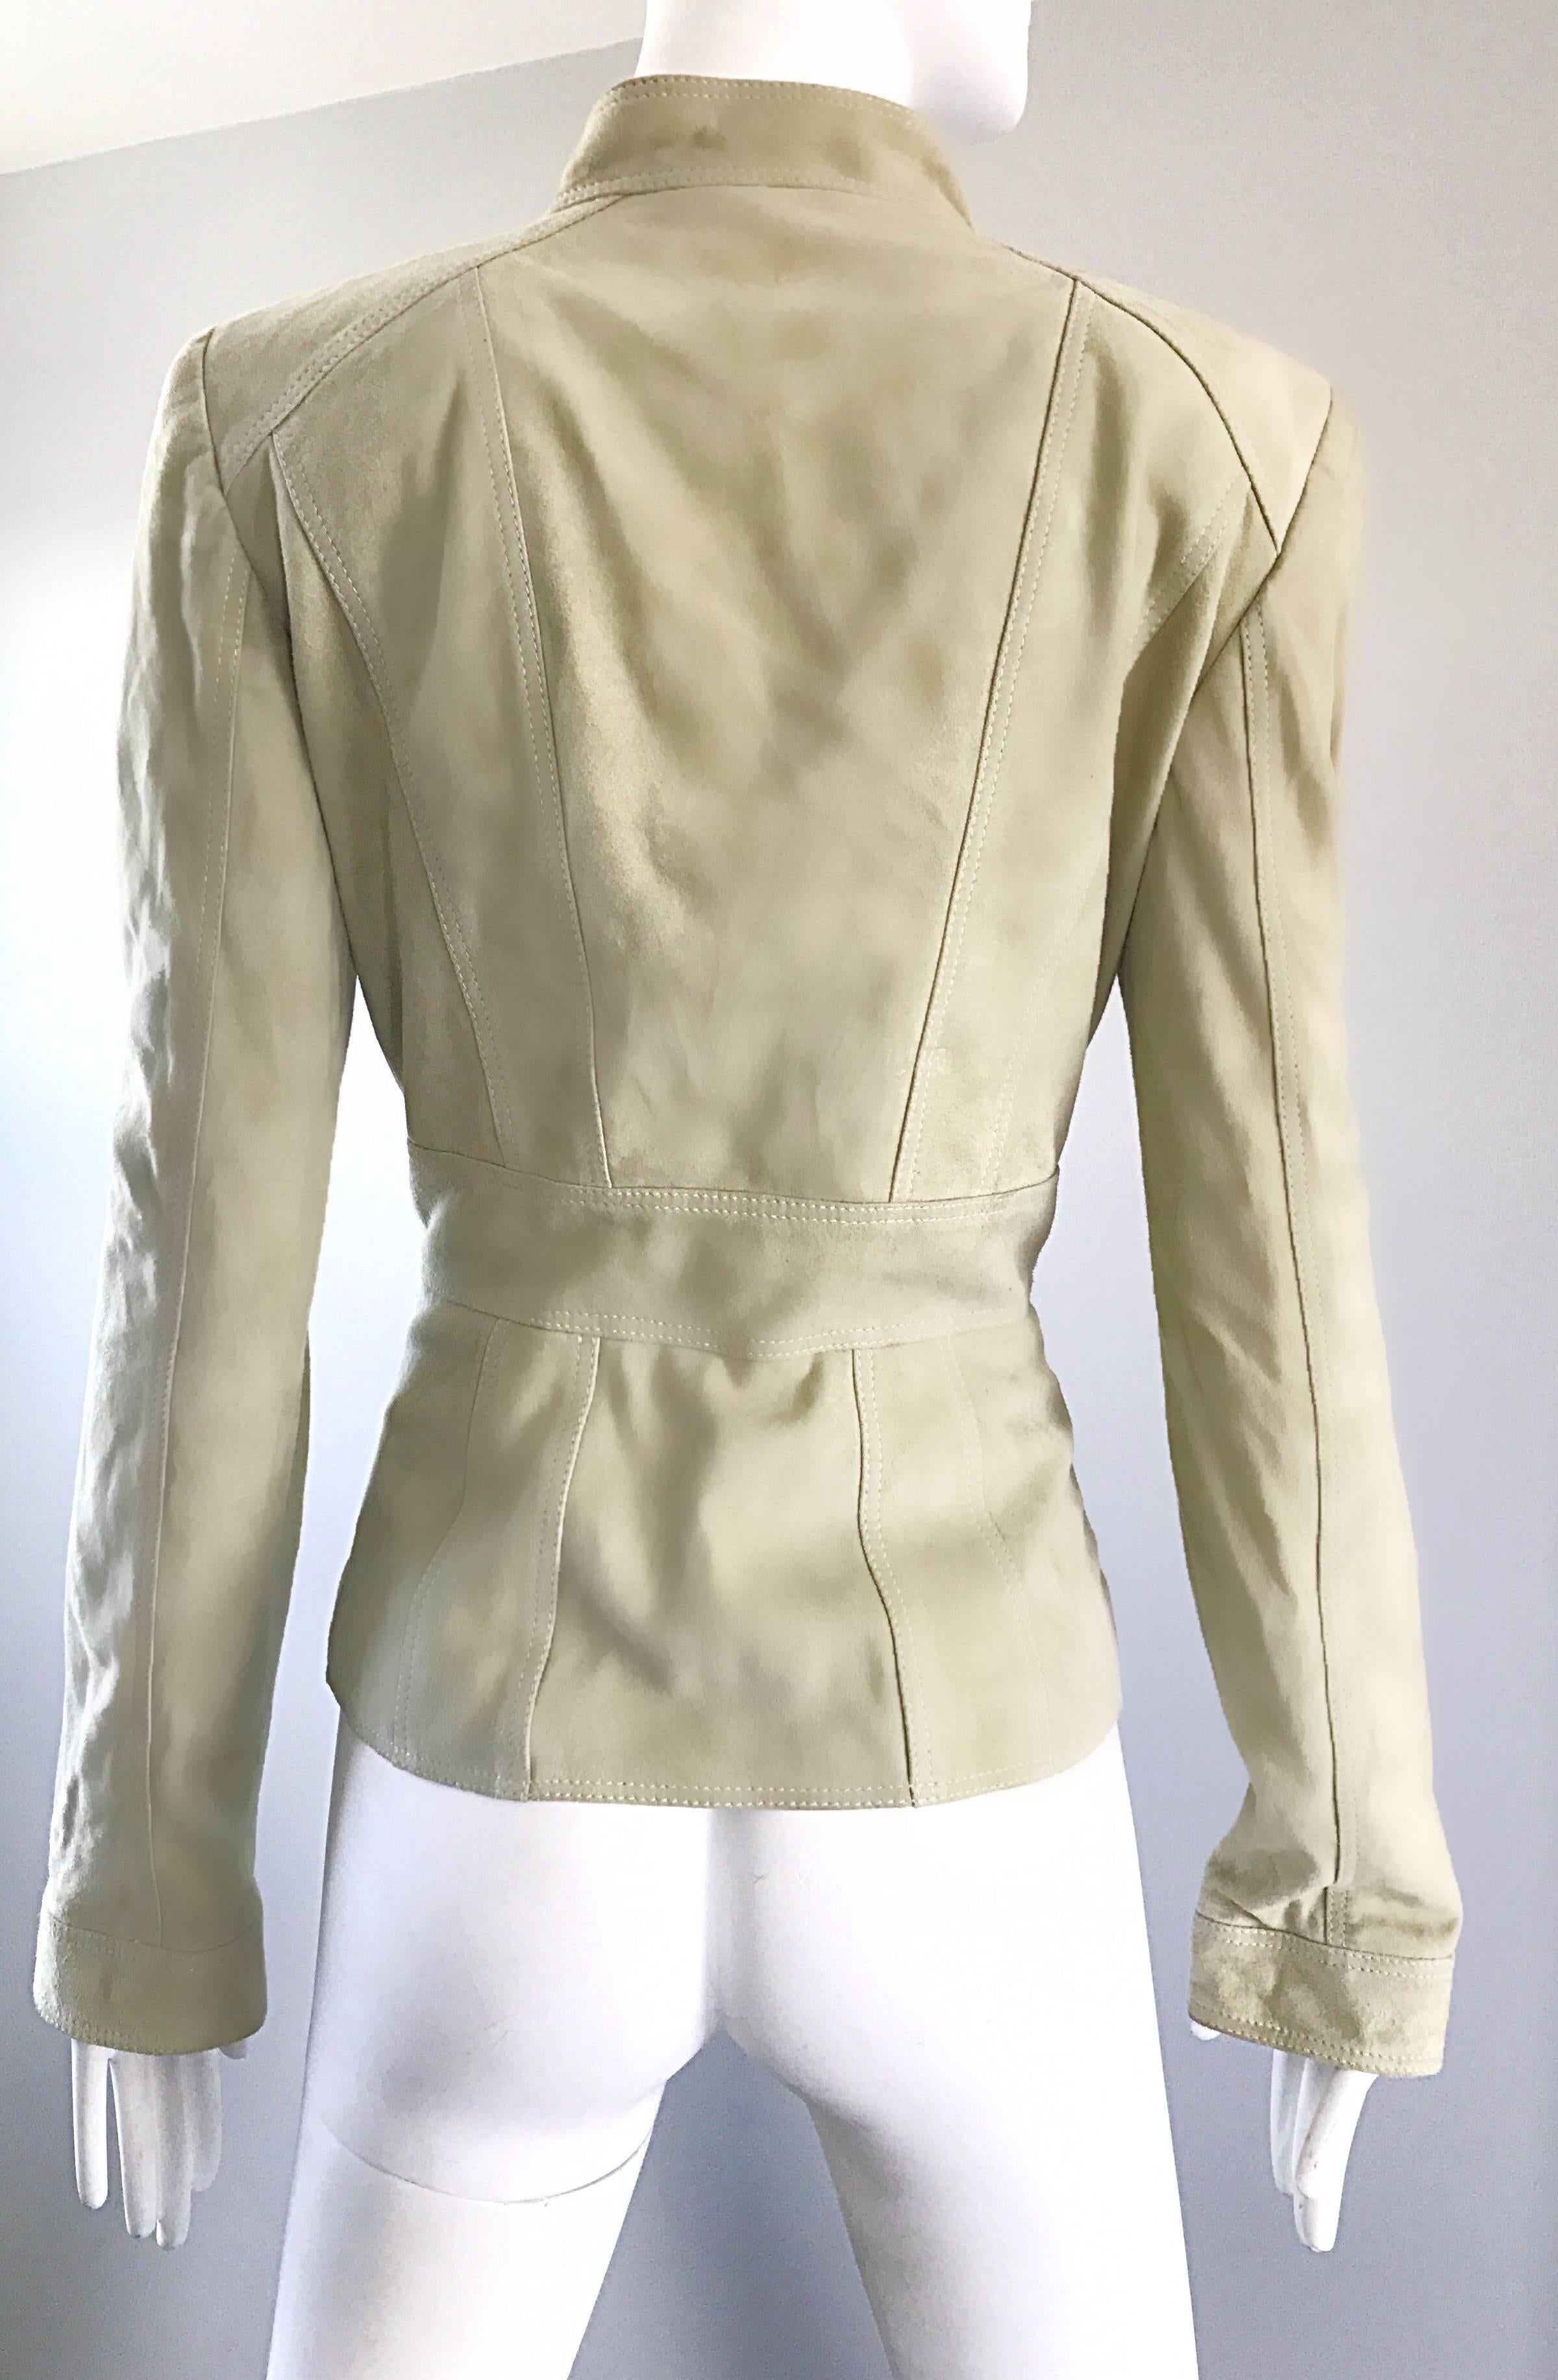 Tom Ford for Gucci Pistachio Khaki Suede Leather 1990s Vintage Ruffle Jacket  2